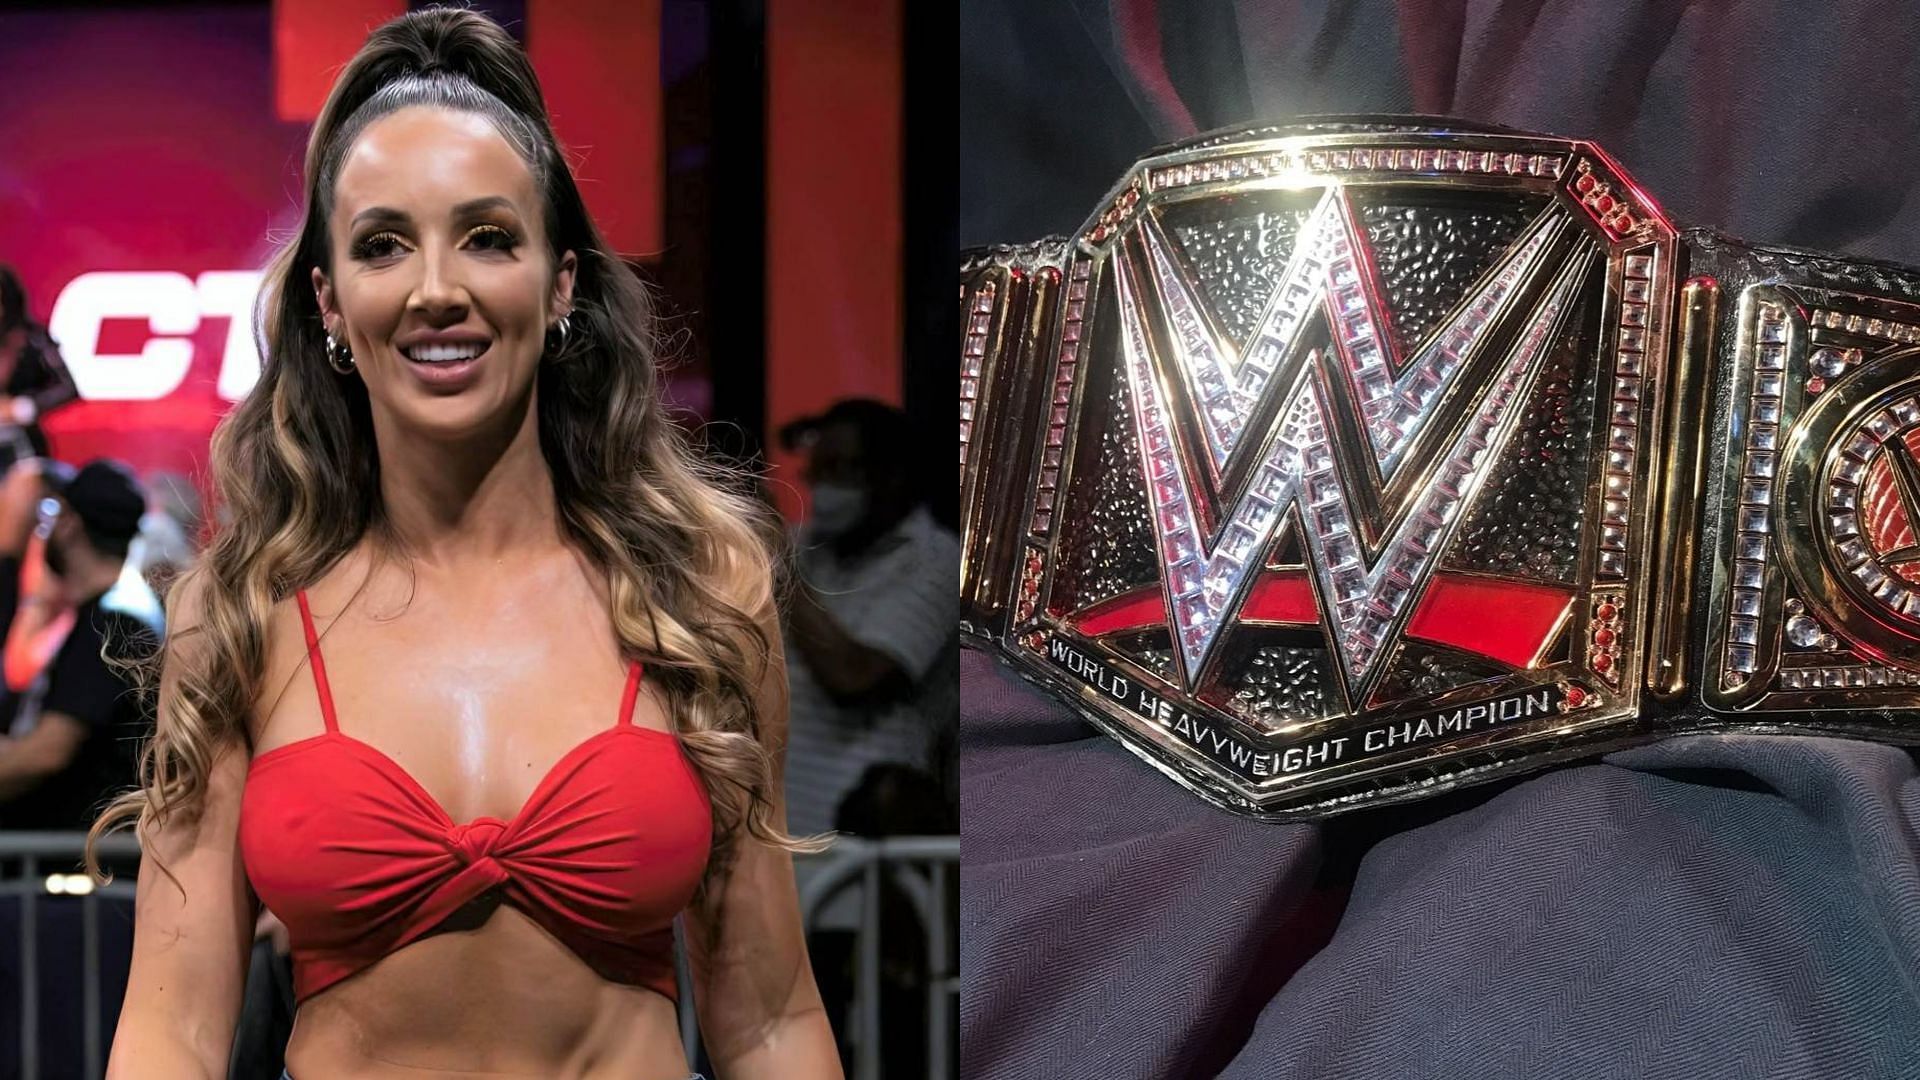 Chelsea Green put a former WWE Champion on notice